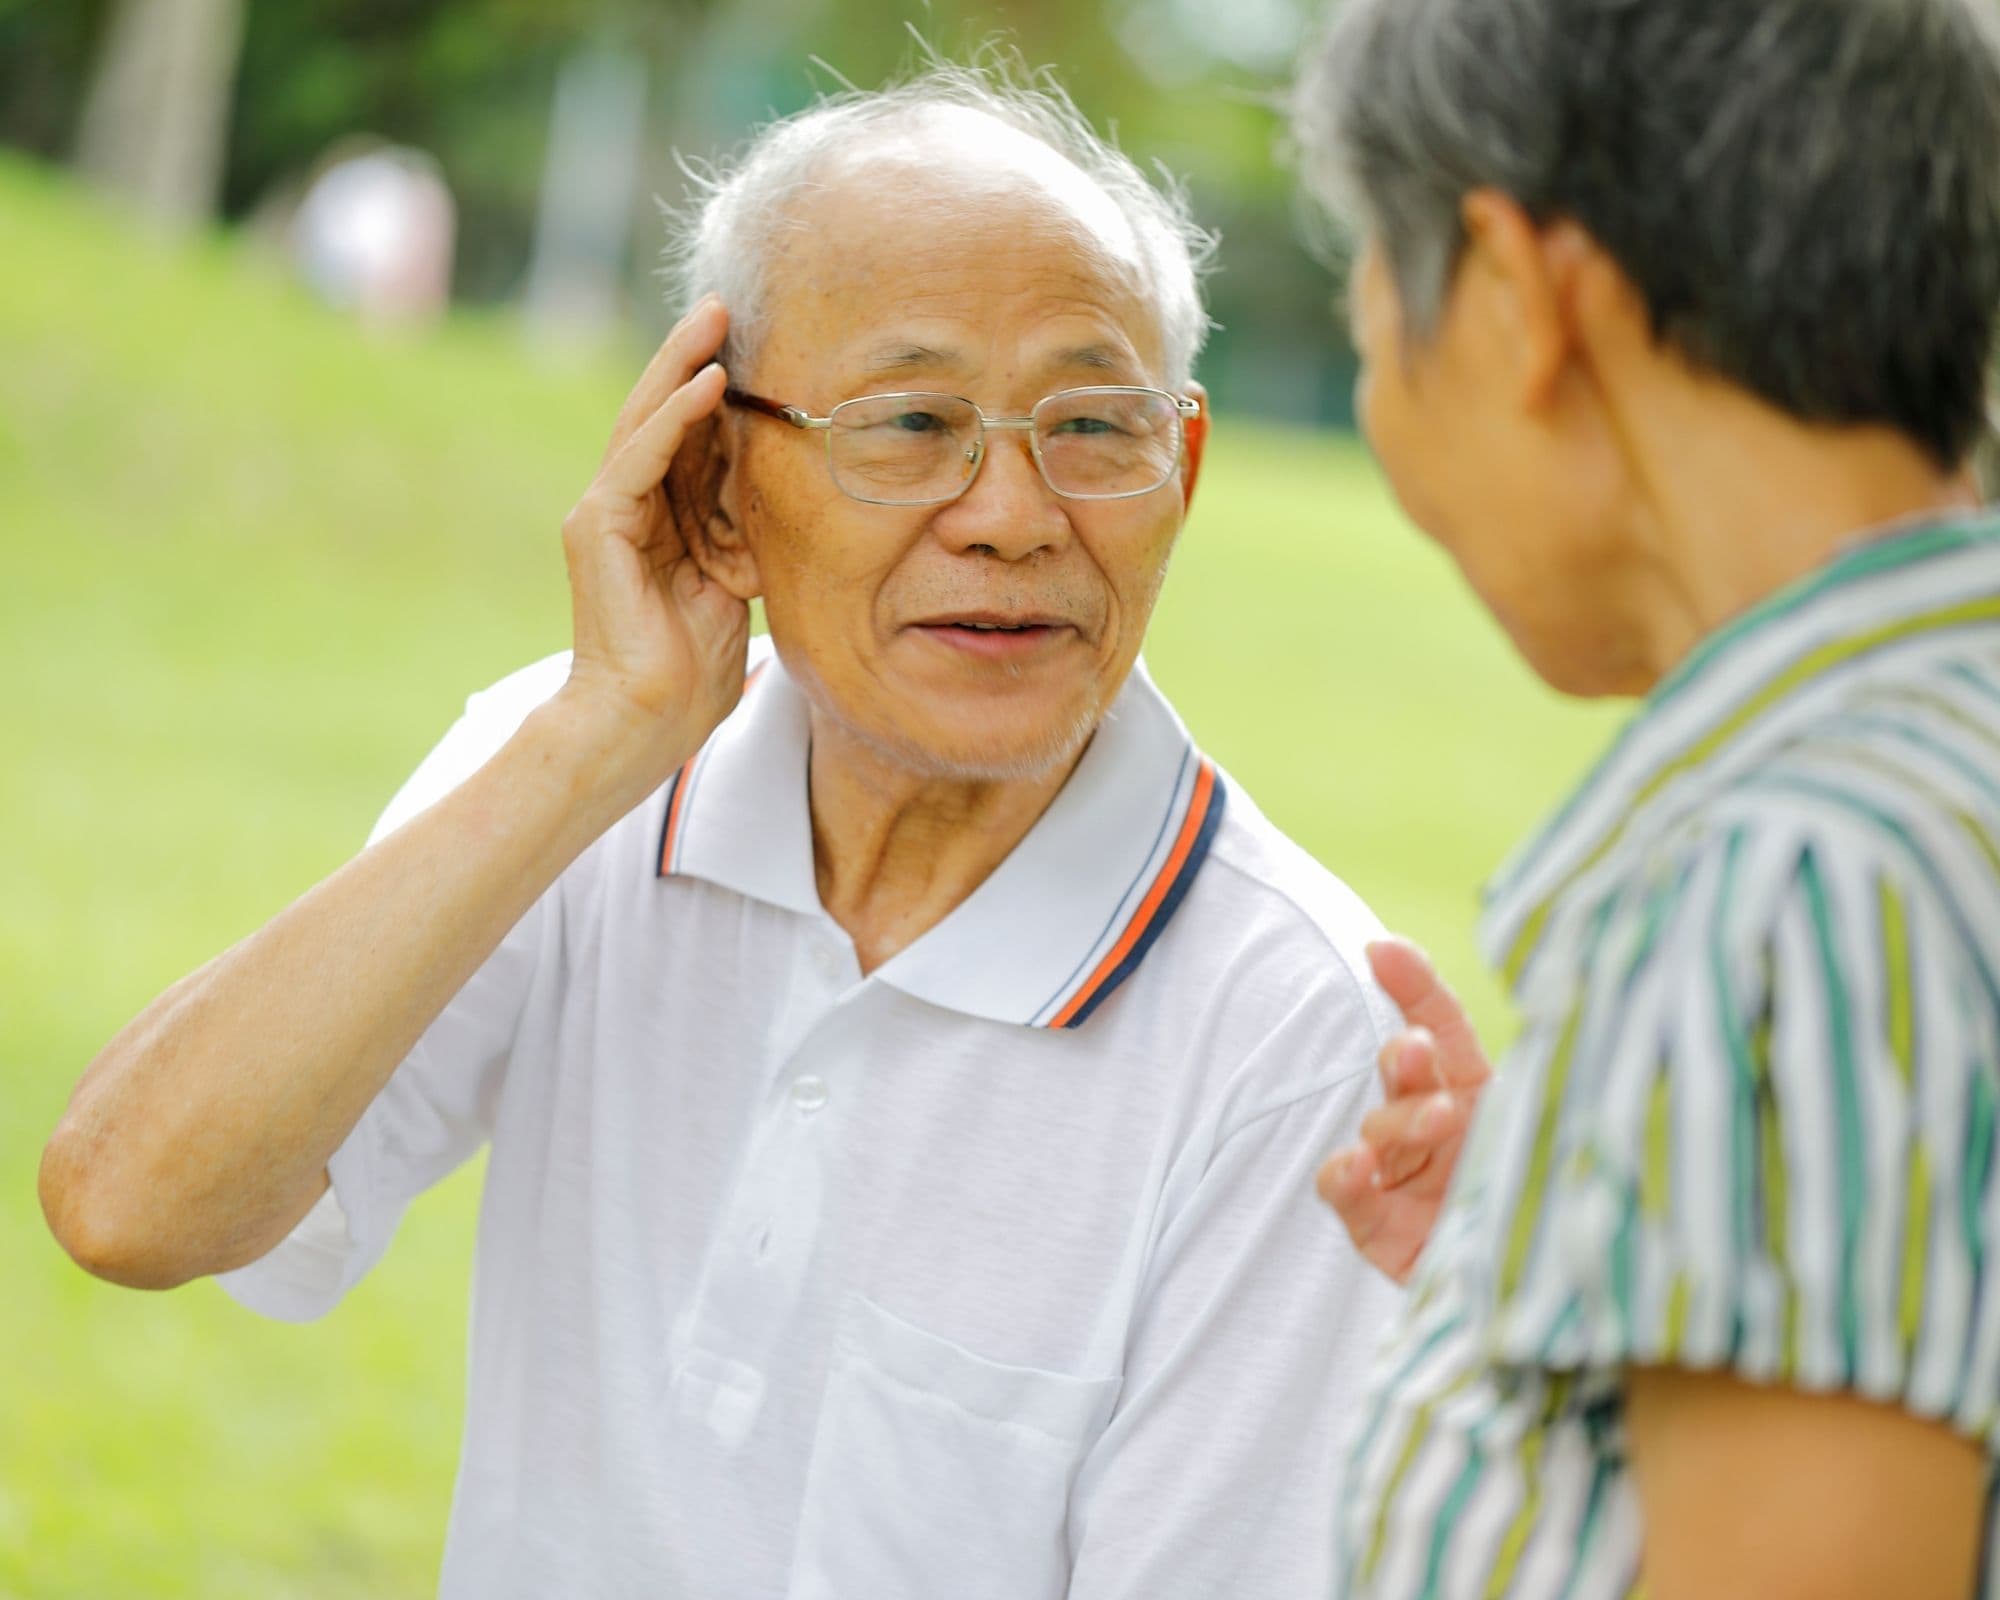 common hearing loss mistakes to avoid